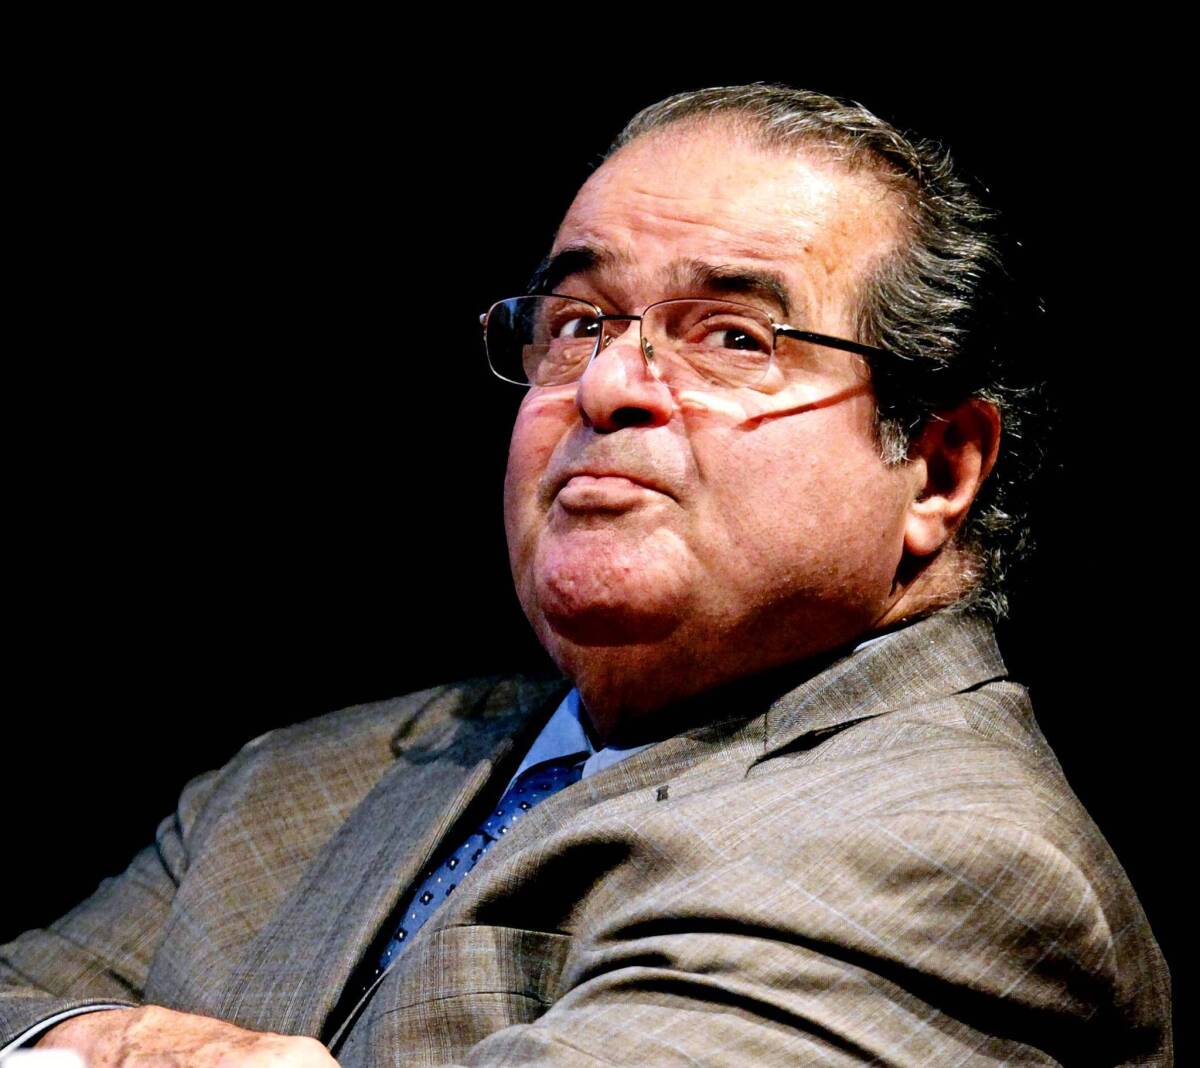 Supreme Court Justice Antonin Scalia asked several pointed question on same-sex marriage during oral arguments last week.